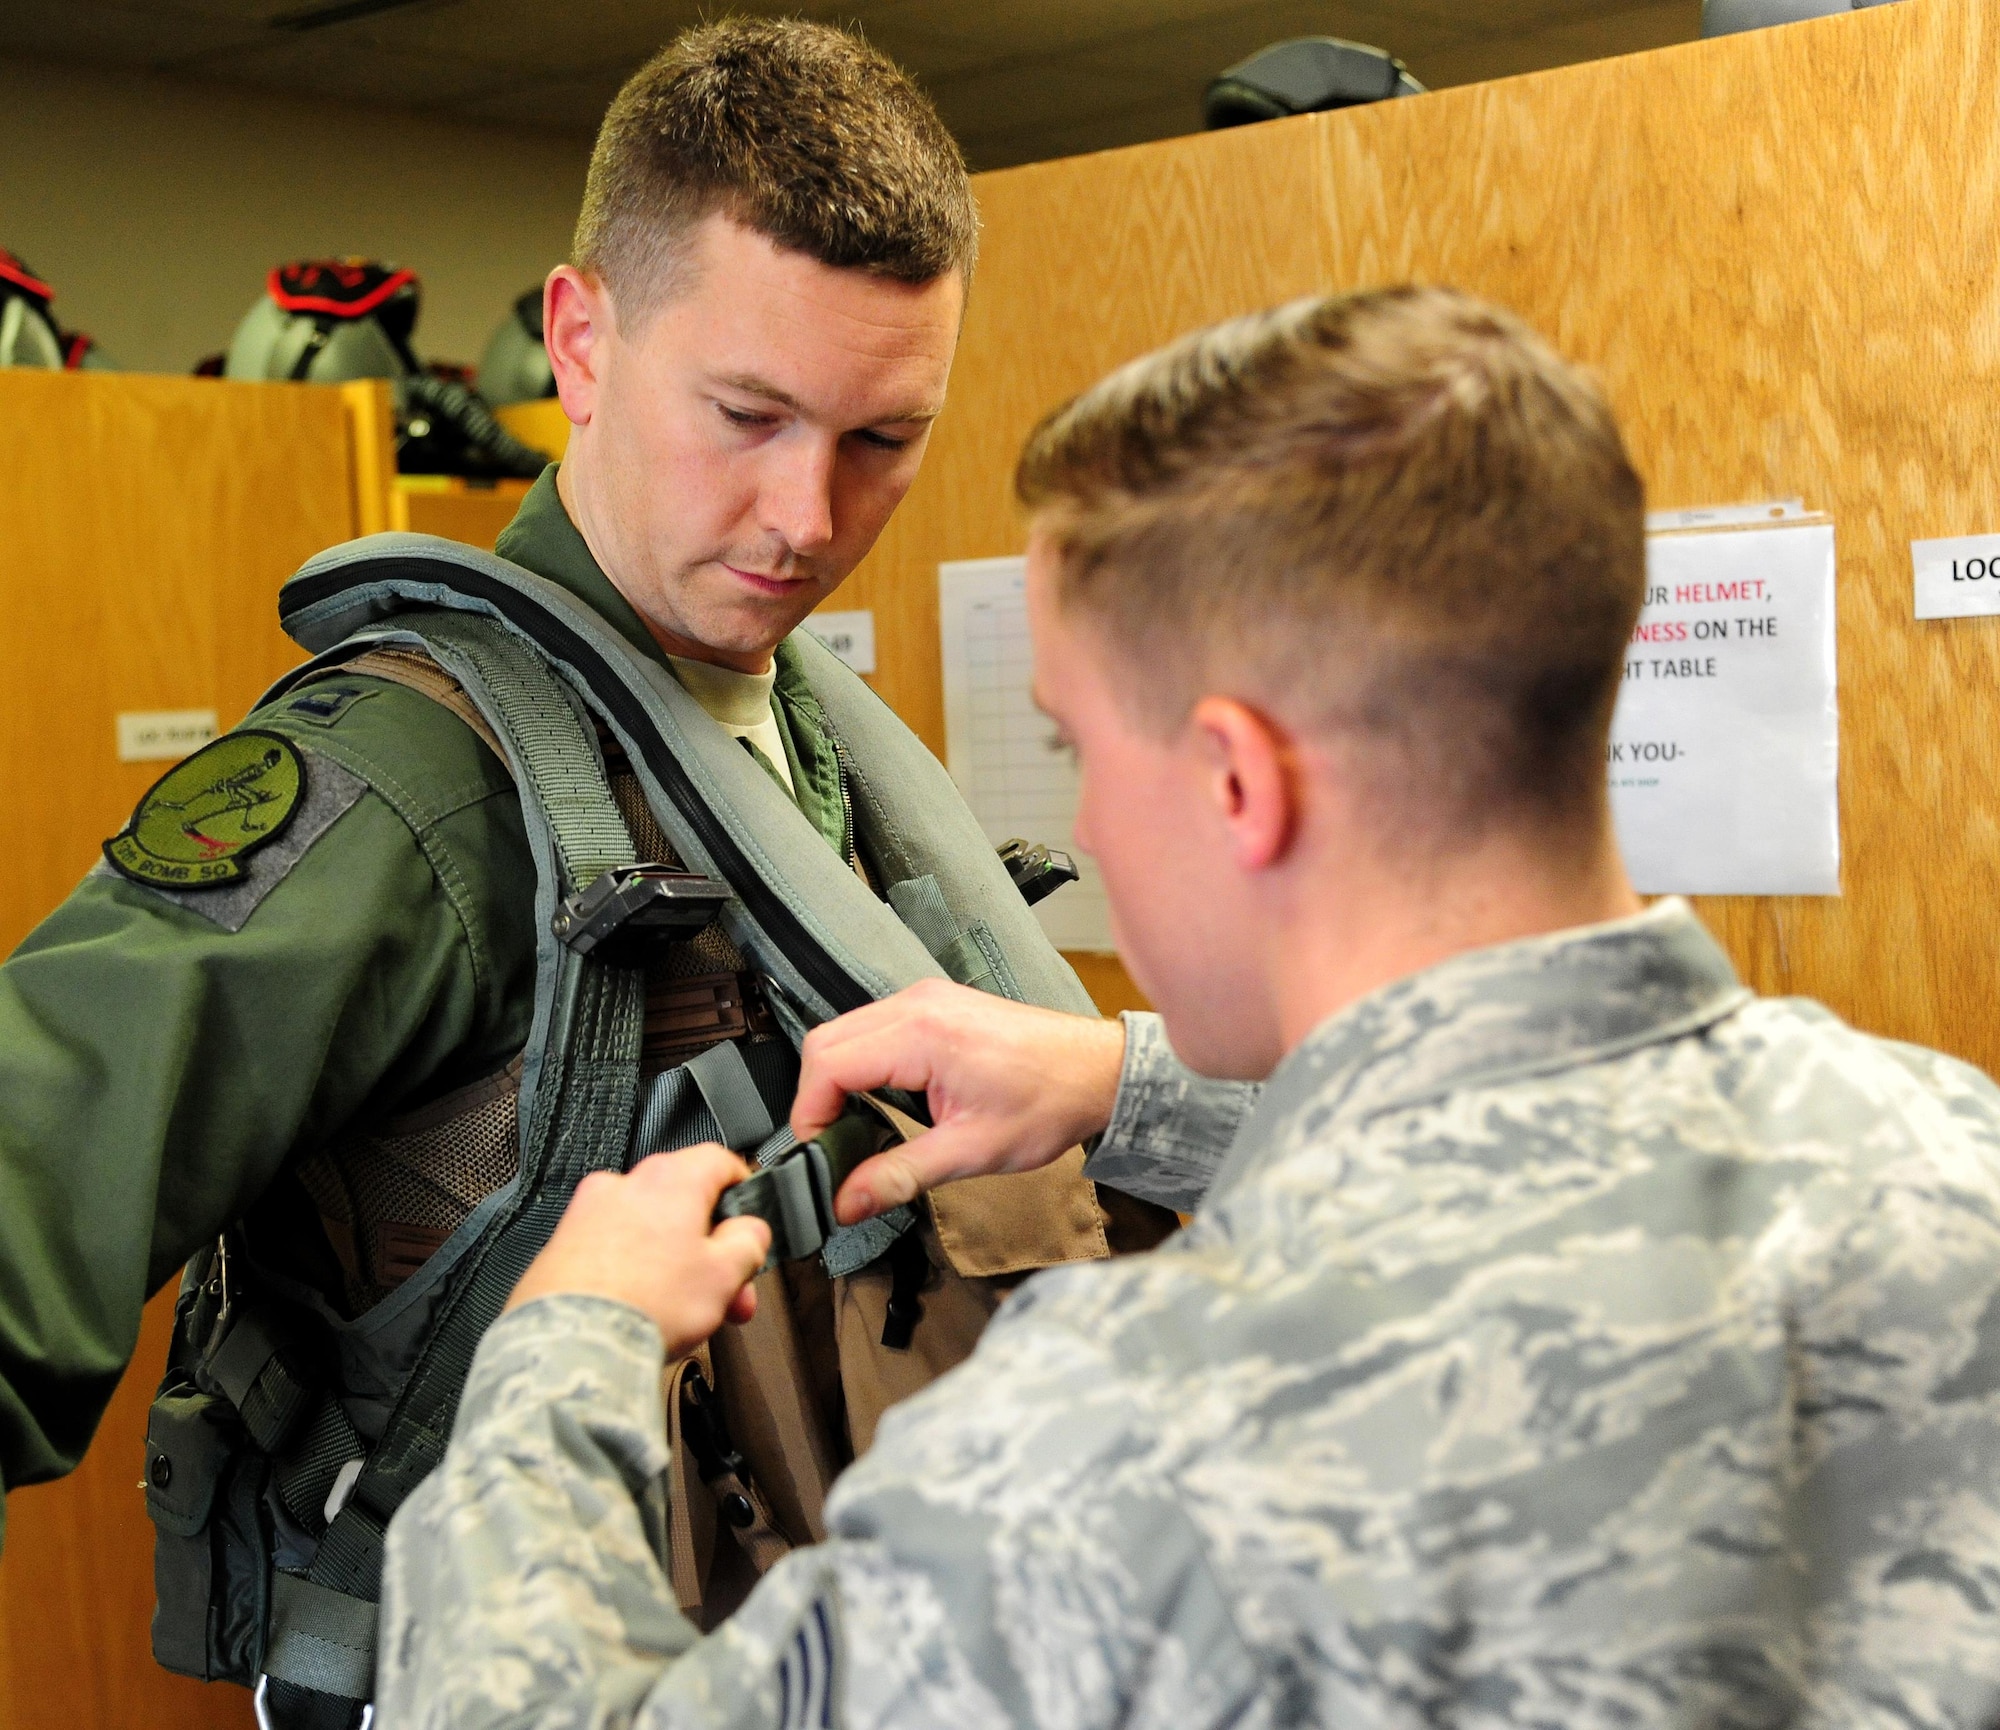 U.S. Air Force Senior Airman Adam Clapp, right, an aircrew flight equipment technician from the 509th Operations Support Squadron, tightens the straps of the aircrew survival vest on Capt. Daniel Welch, a B-2 Spirit pilot assigned to the 13th Bomb Squadron, during Exercise Global Thunder 17 (GT17) at Whiteman Air Force Base, Mo., Oct. 25, 2016. GT17 is an invaluable training opportunity to exercise all U.S. Strategic Command mission areas and create the conditions for strategic deterrence against a variety of threats.(U.S. Air Force photo by Senior Airman Joel Pfiester)